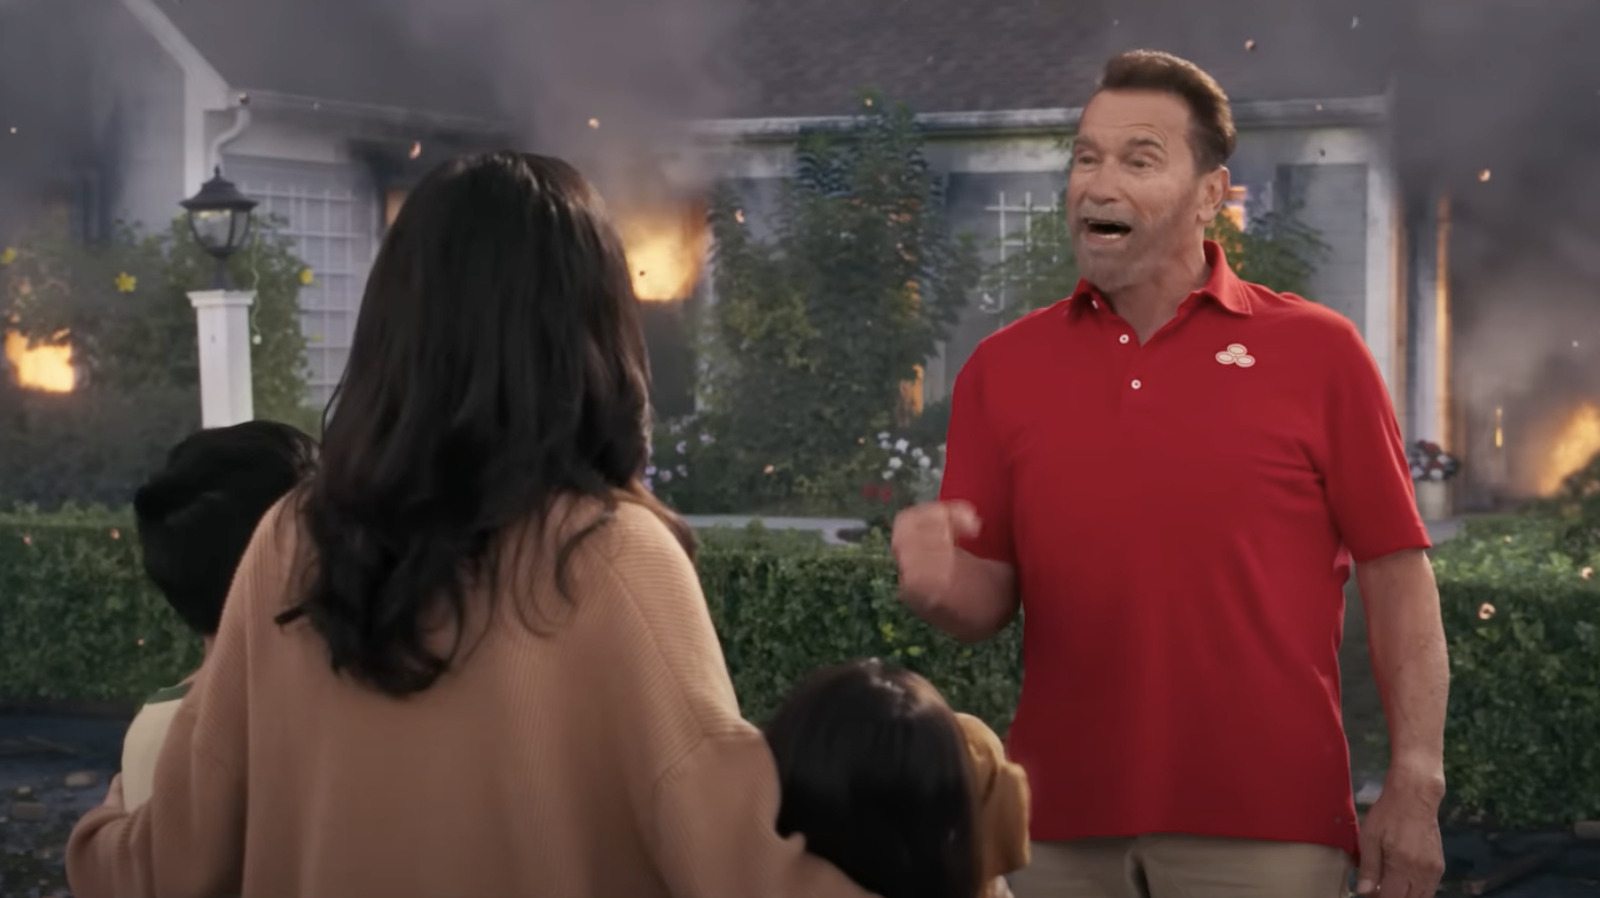 Arnold Schwarzenegger Reunites With His Greatest Co-Star For New Super Bowl Commercial